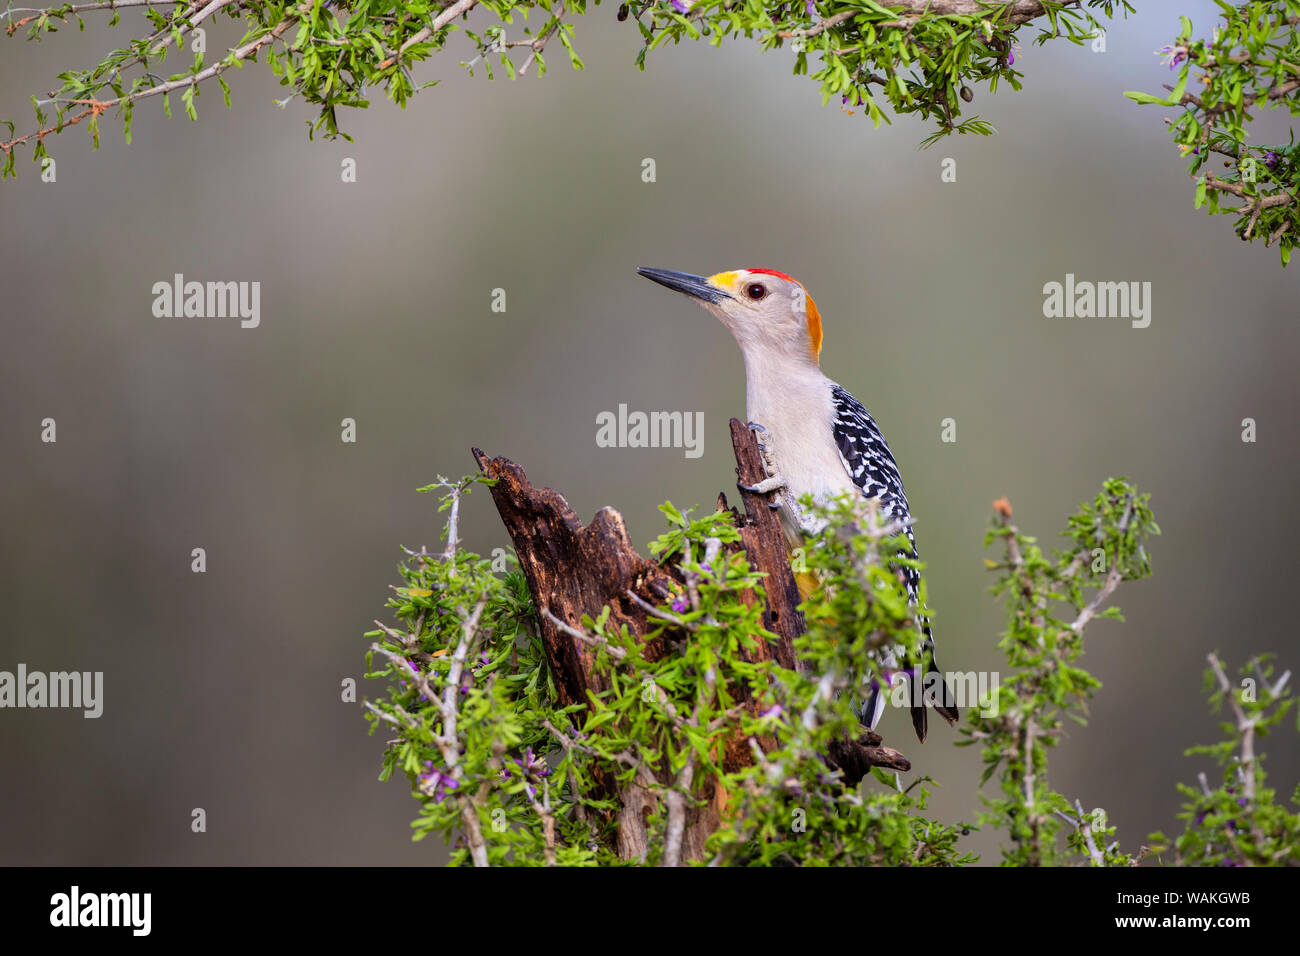 Golden-fronted woodpecker (Melanerpes aurifrons) foraging. Stock Photo